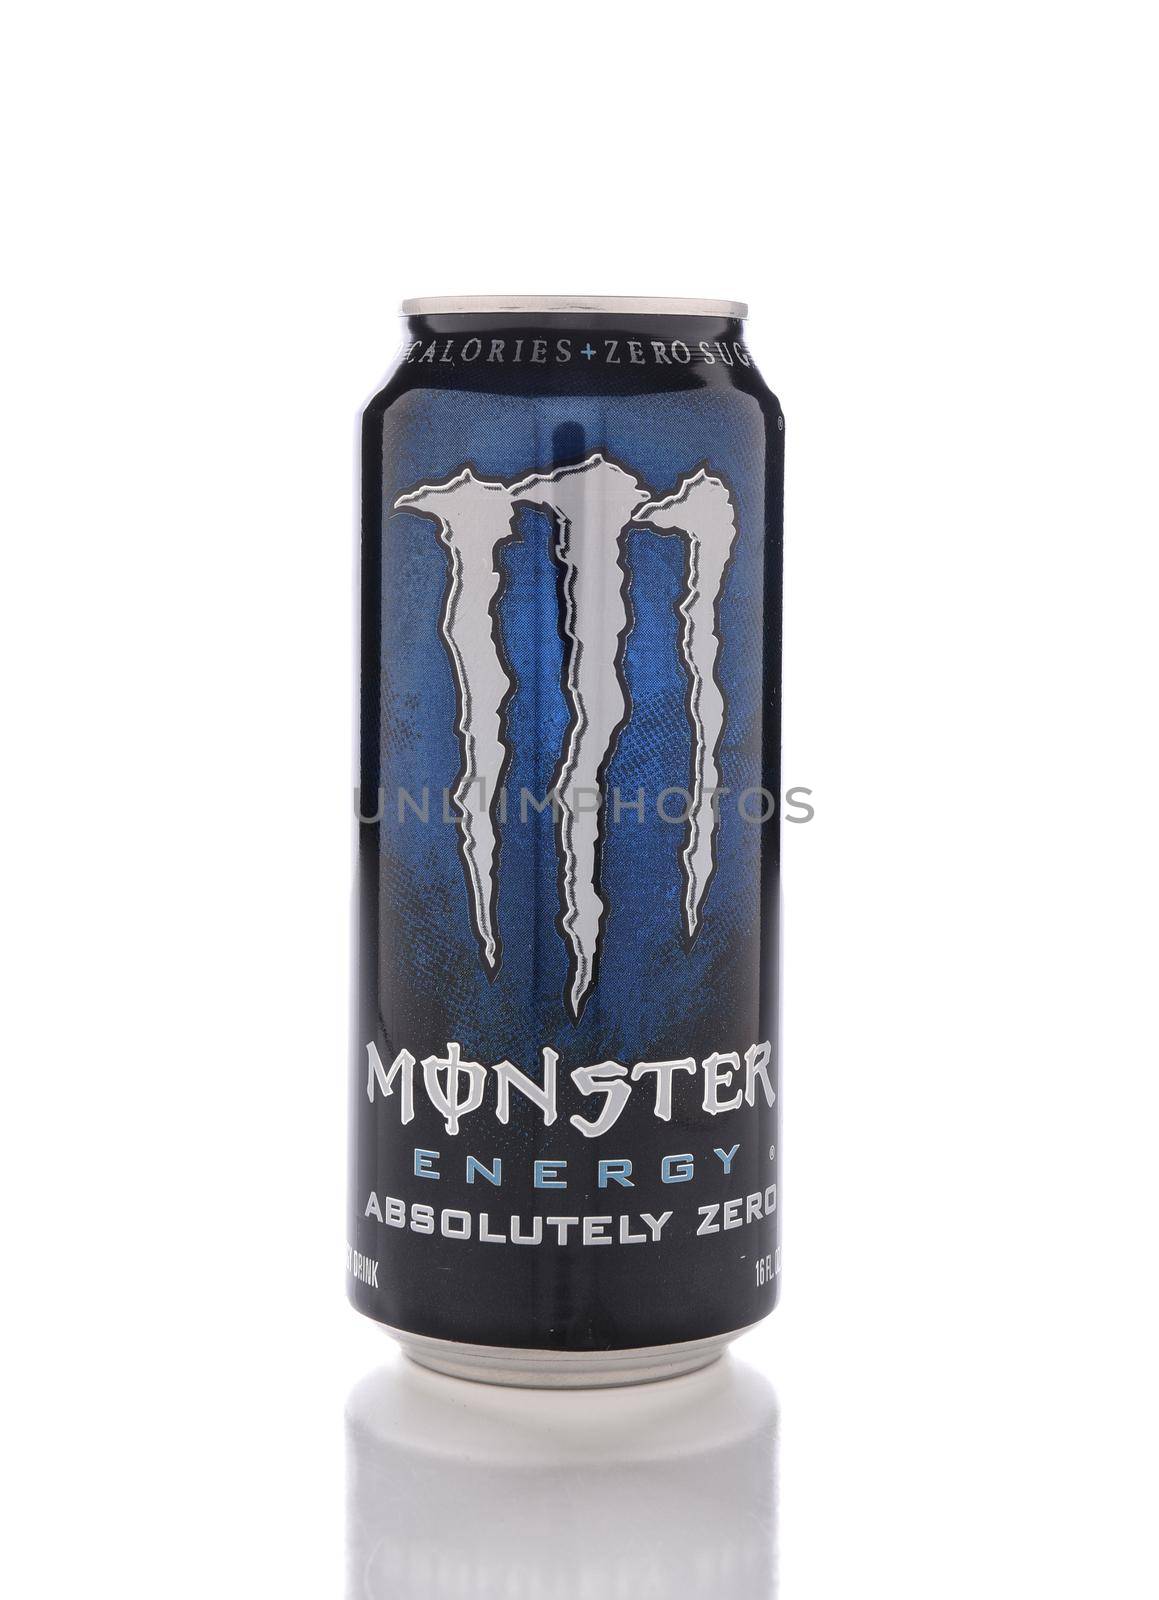 A can of Monster Energy Absolutely Zero by sCukrov